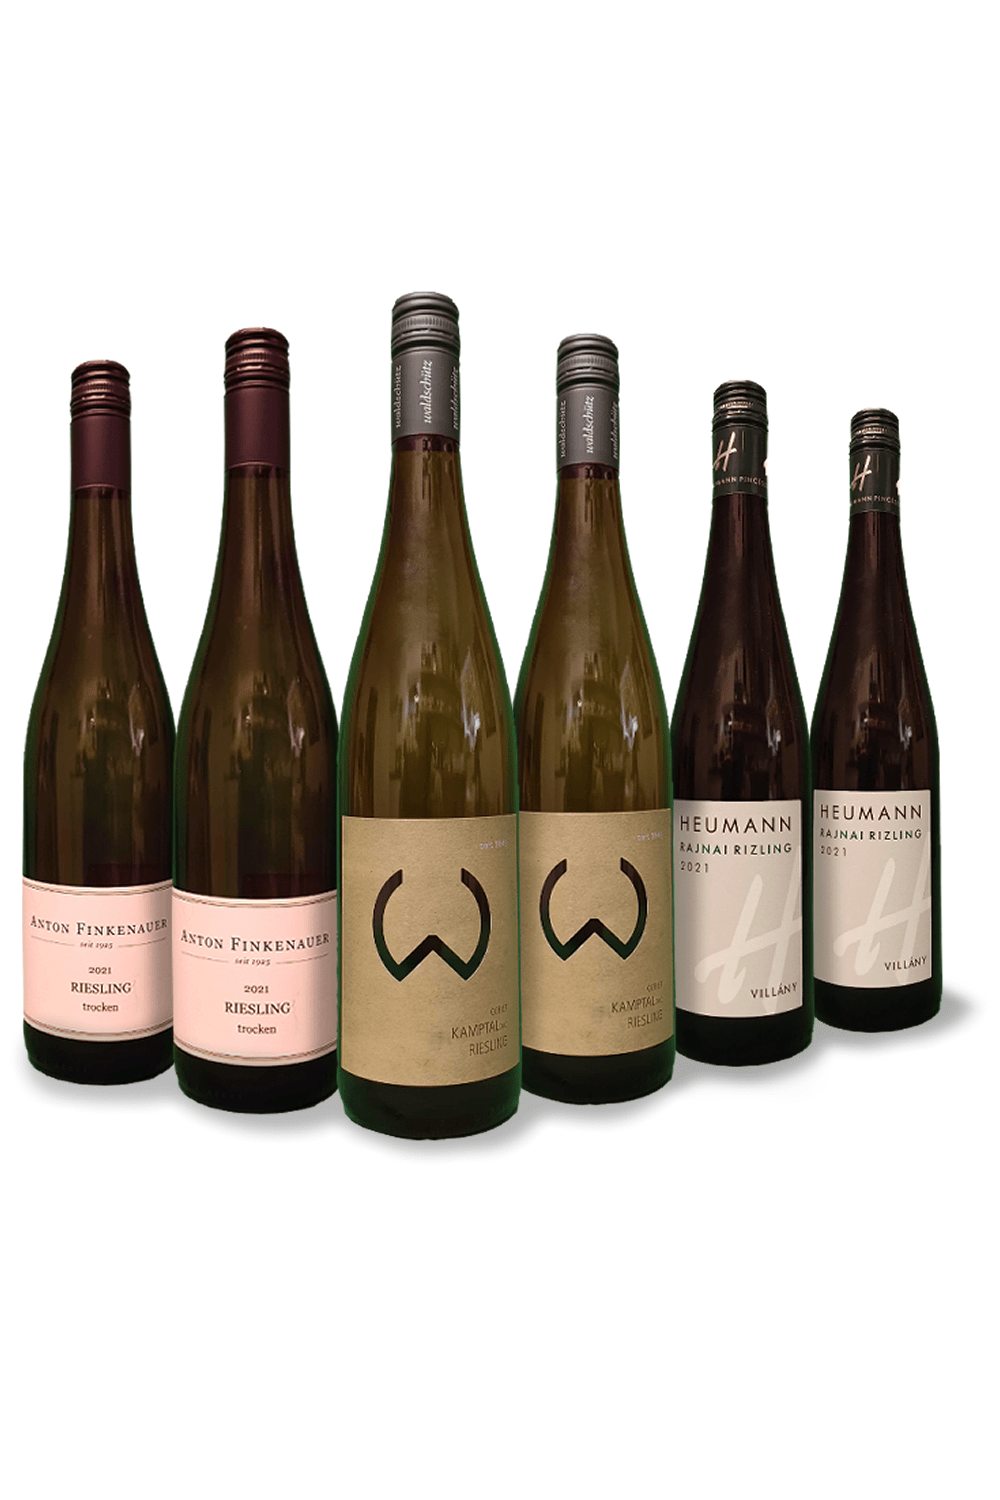 Novel Wines Mixed Case Our Deal On Dry European Rieslings - Six Bottle Mixed Case Offer